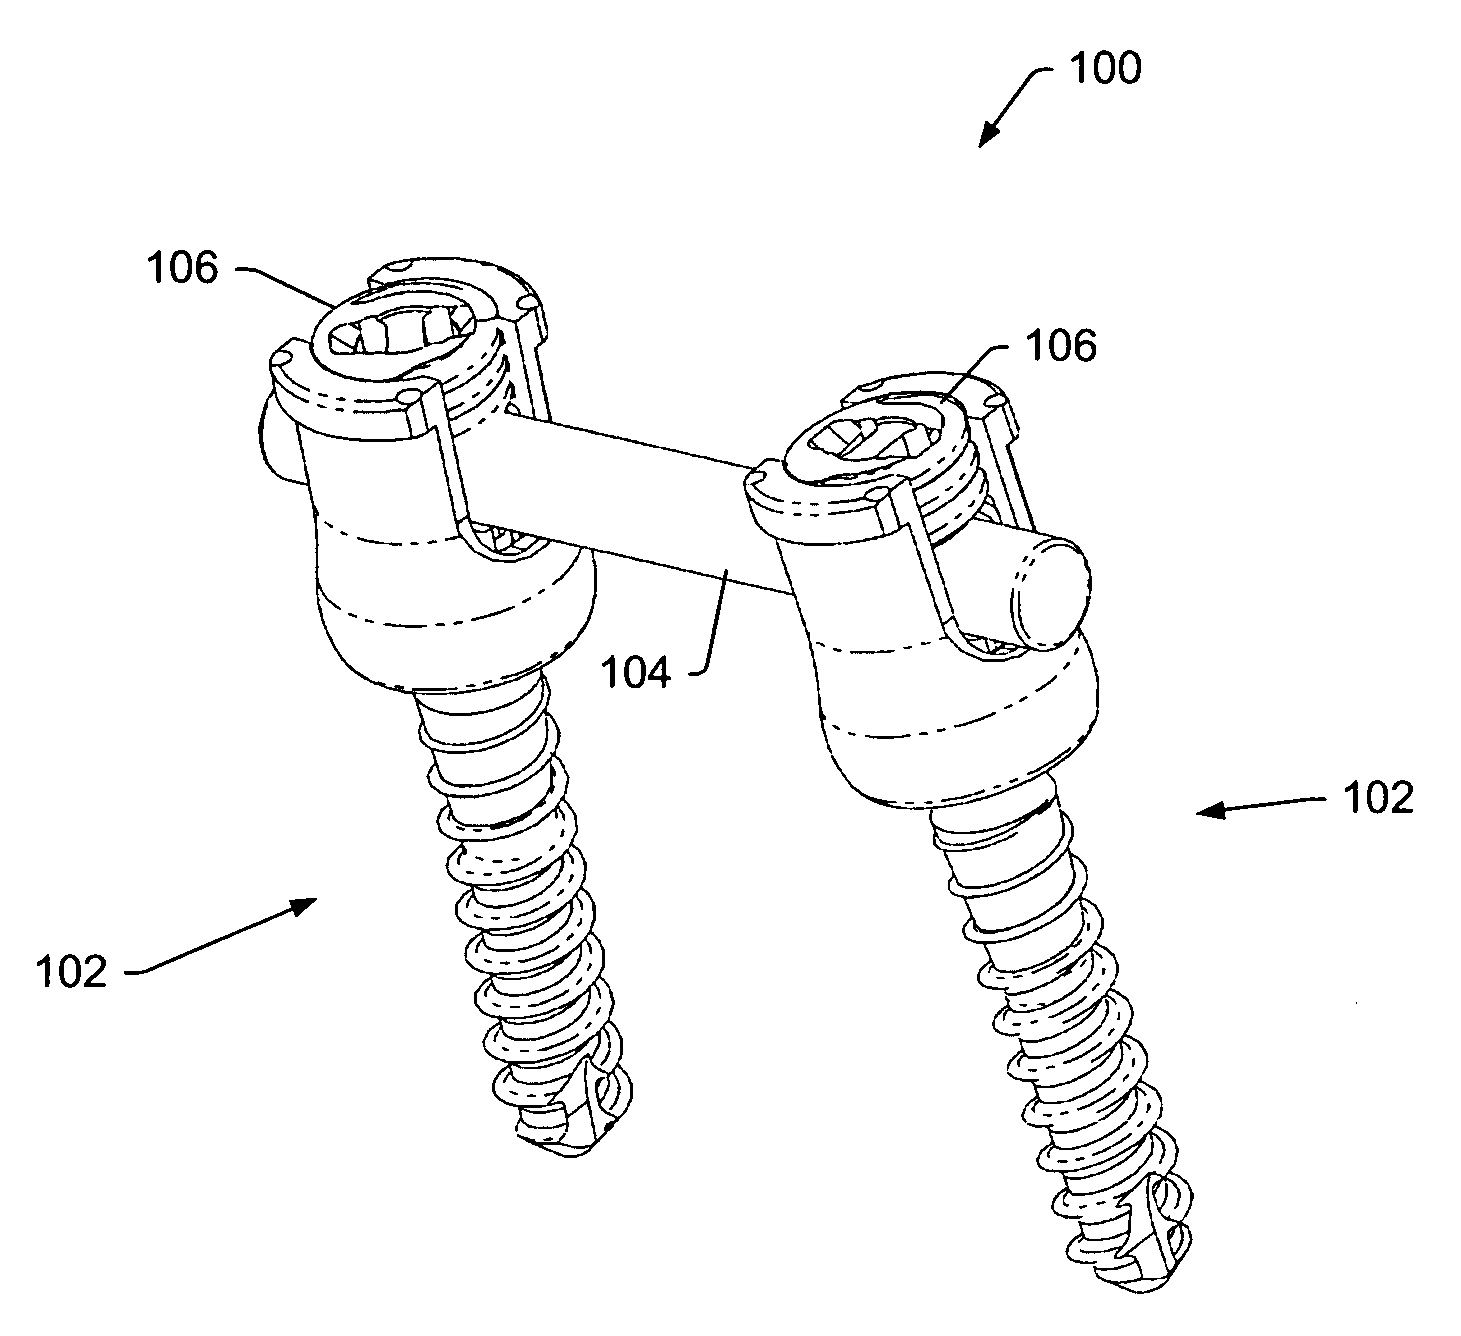 Instruments and methods for adjusting separation distance of vertebral bodies with a minimally invasive spinal stabilization procedure